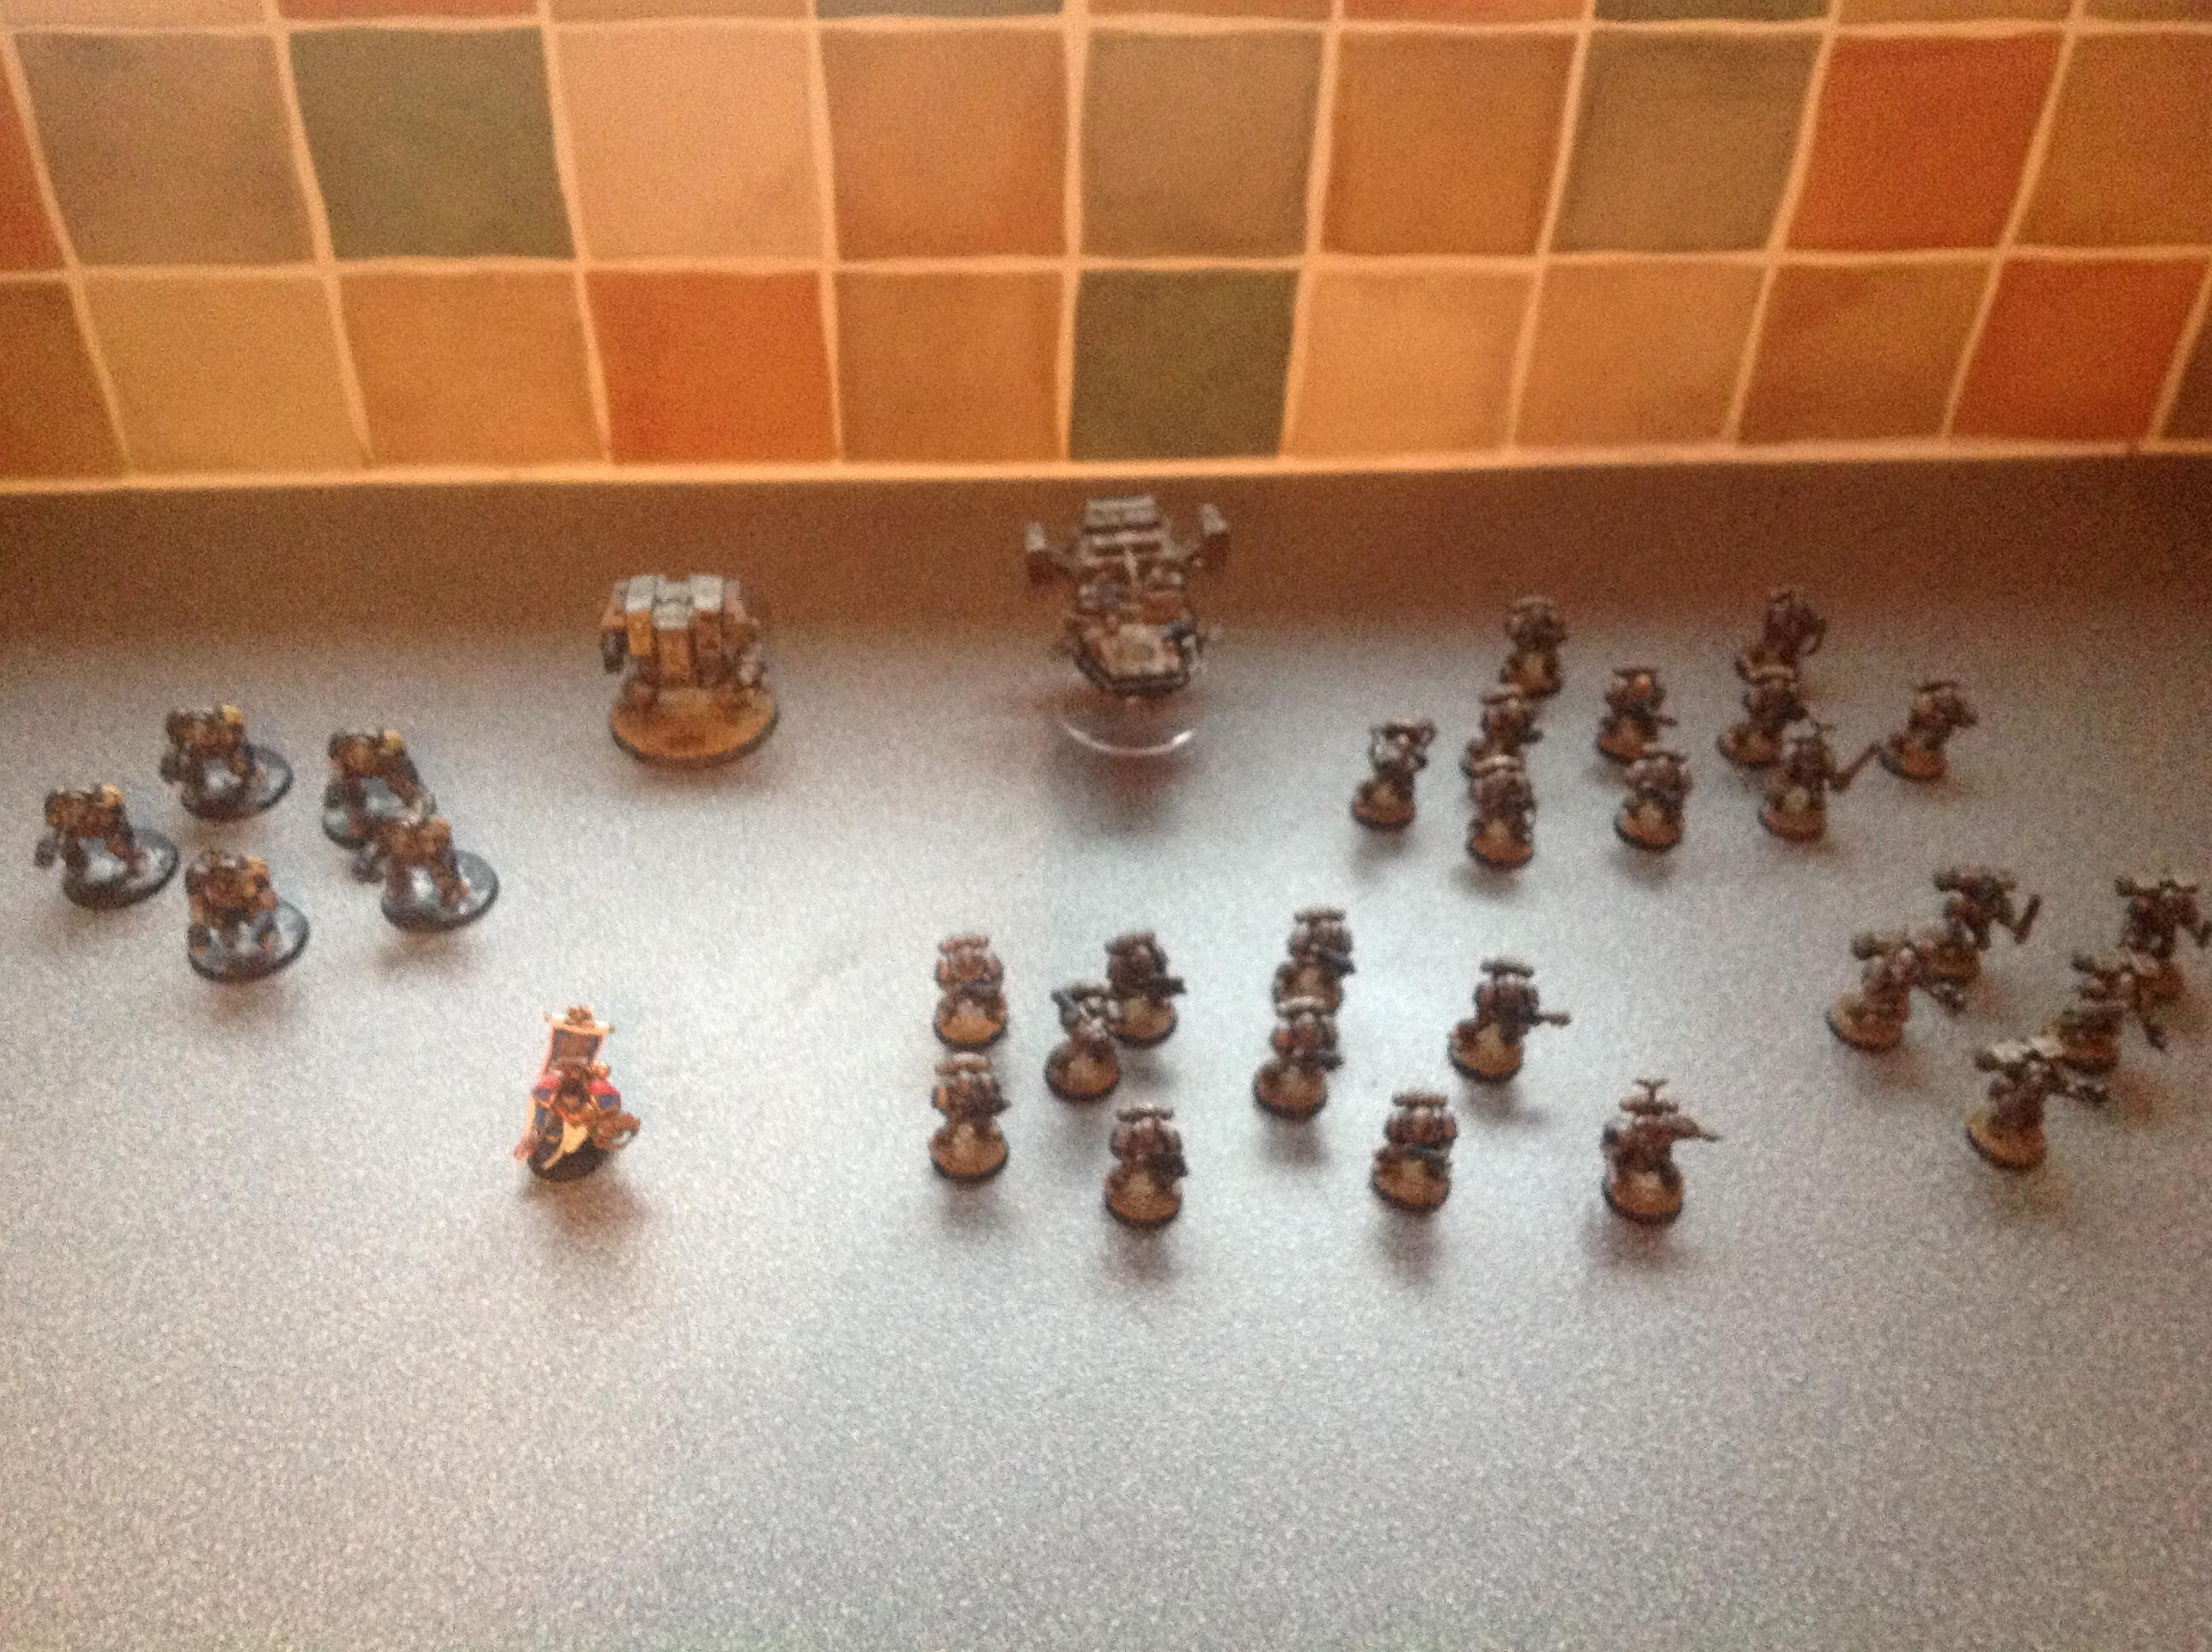 Ebay, For Sale, Space, Space Marines